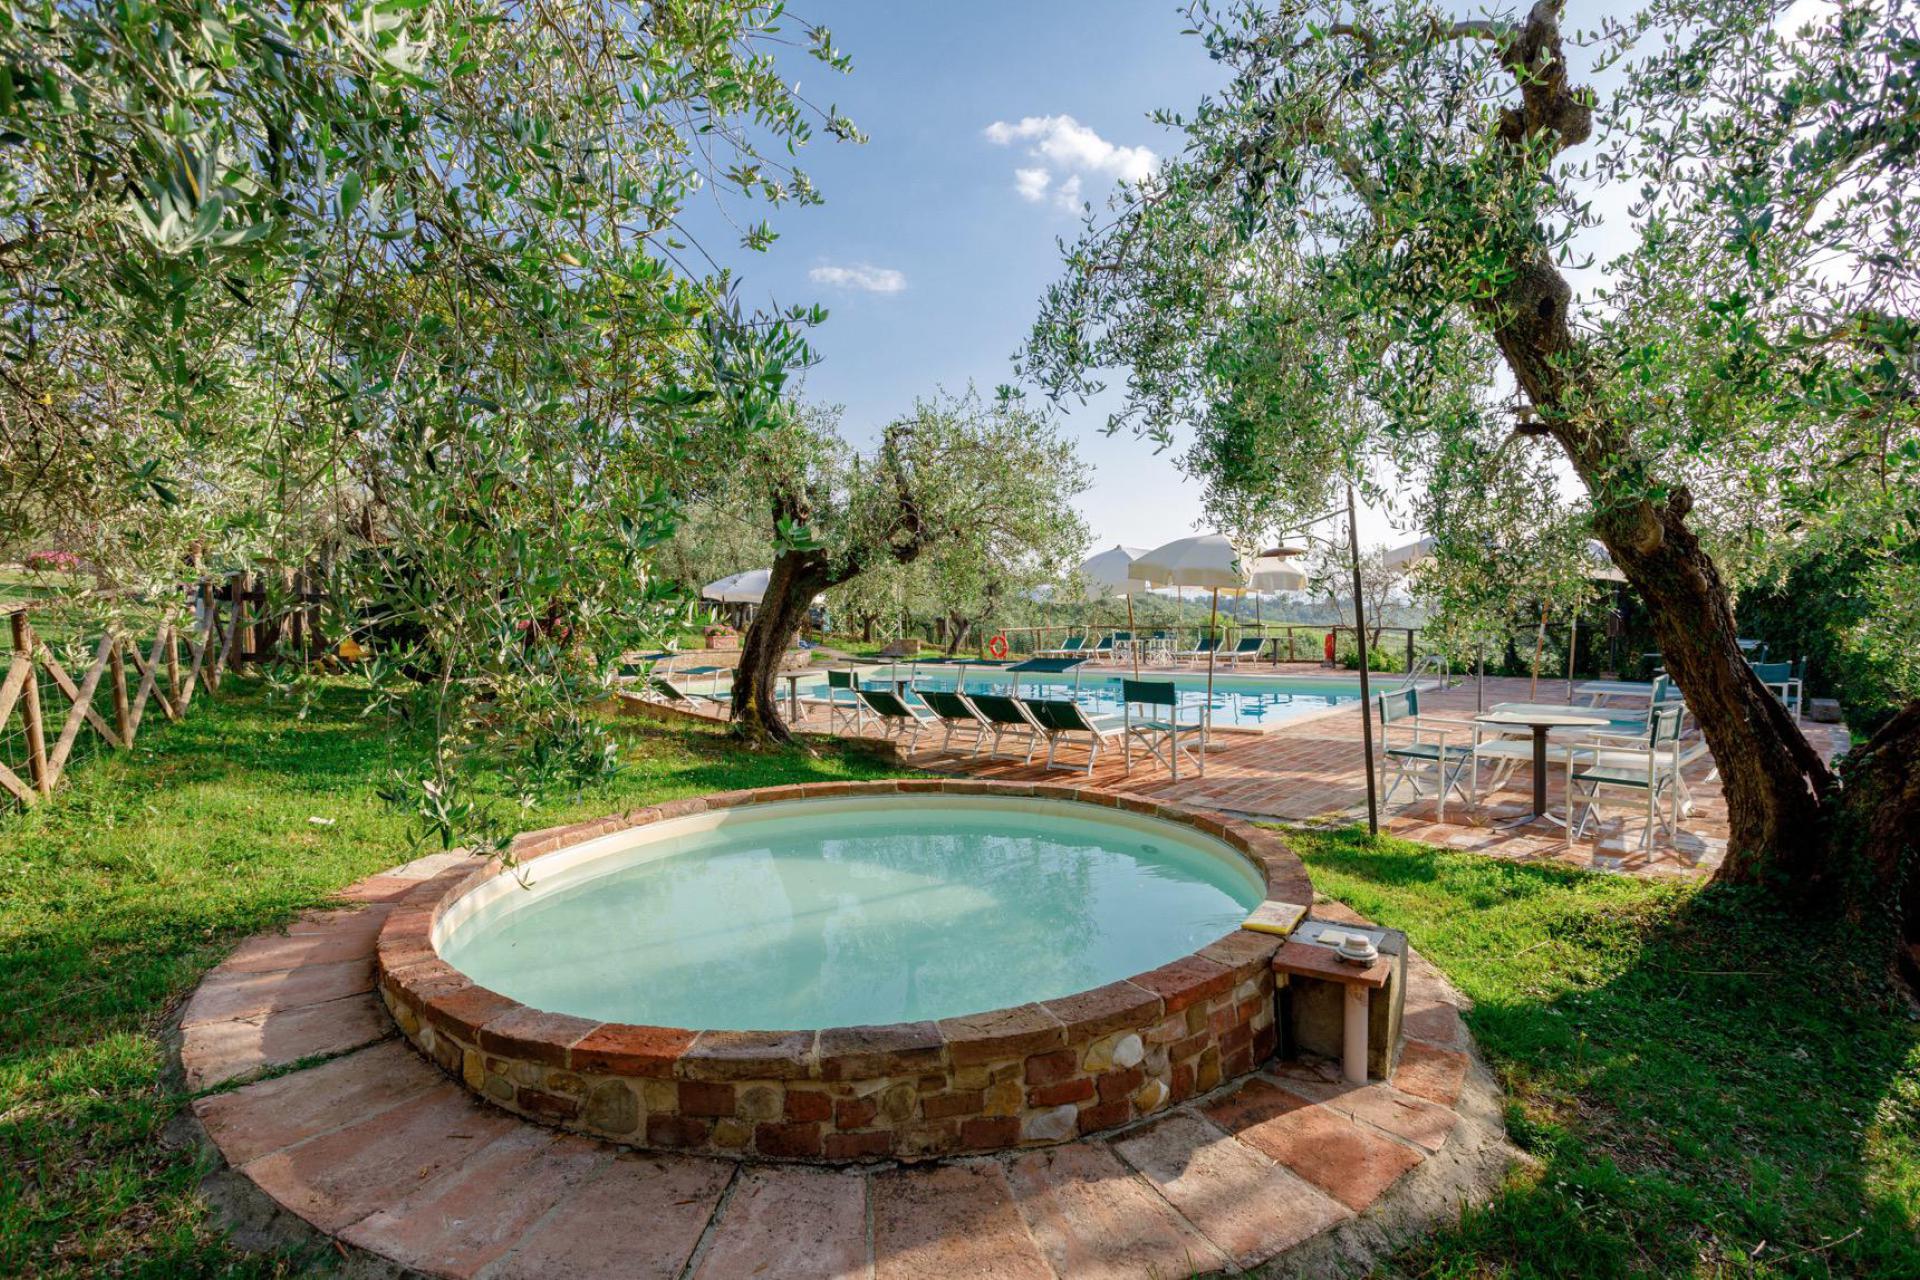 Hospitable, child-friendly agriturismo with restaurant